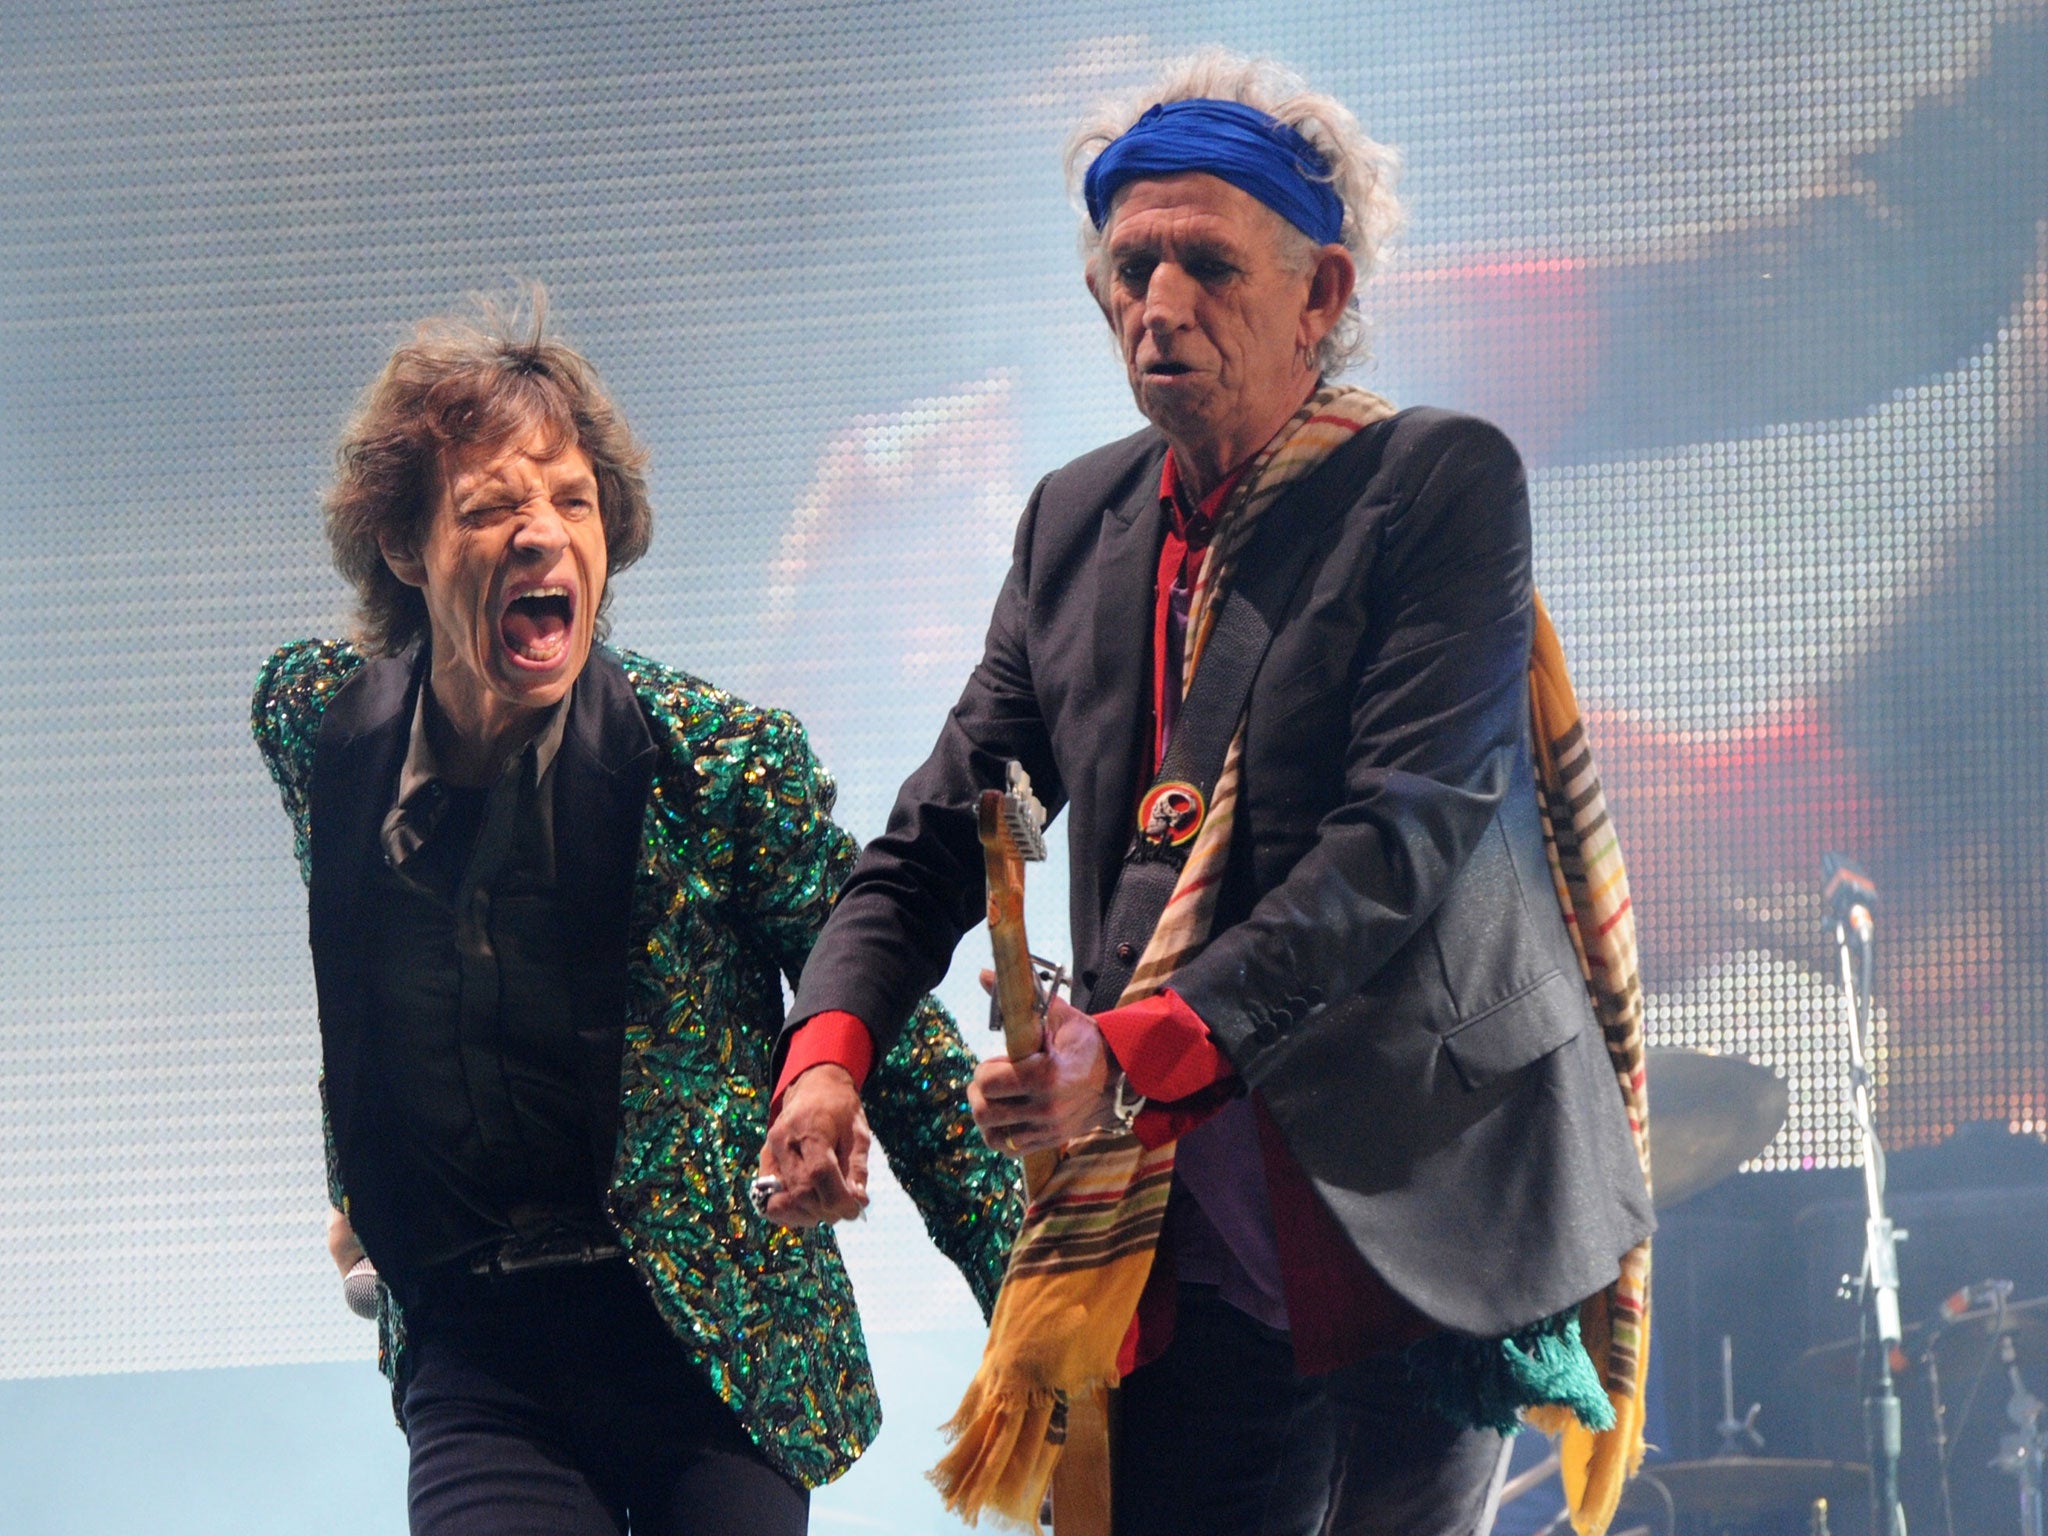 Anybody seen my baby? Mick Jagger and Keith Richards of The Rolling Stones